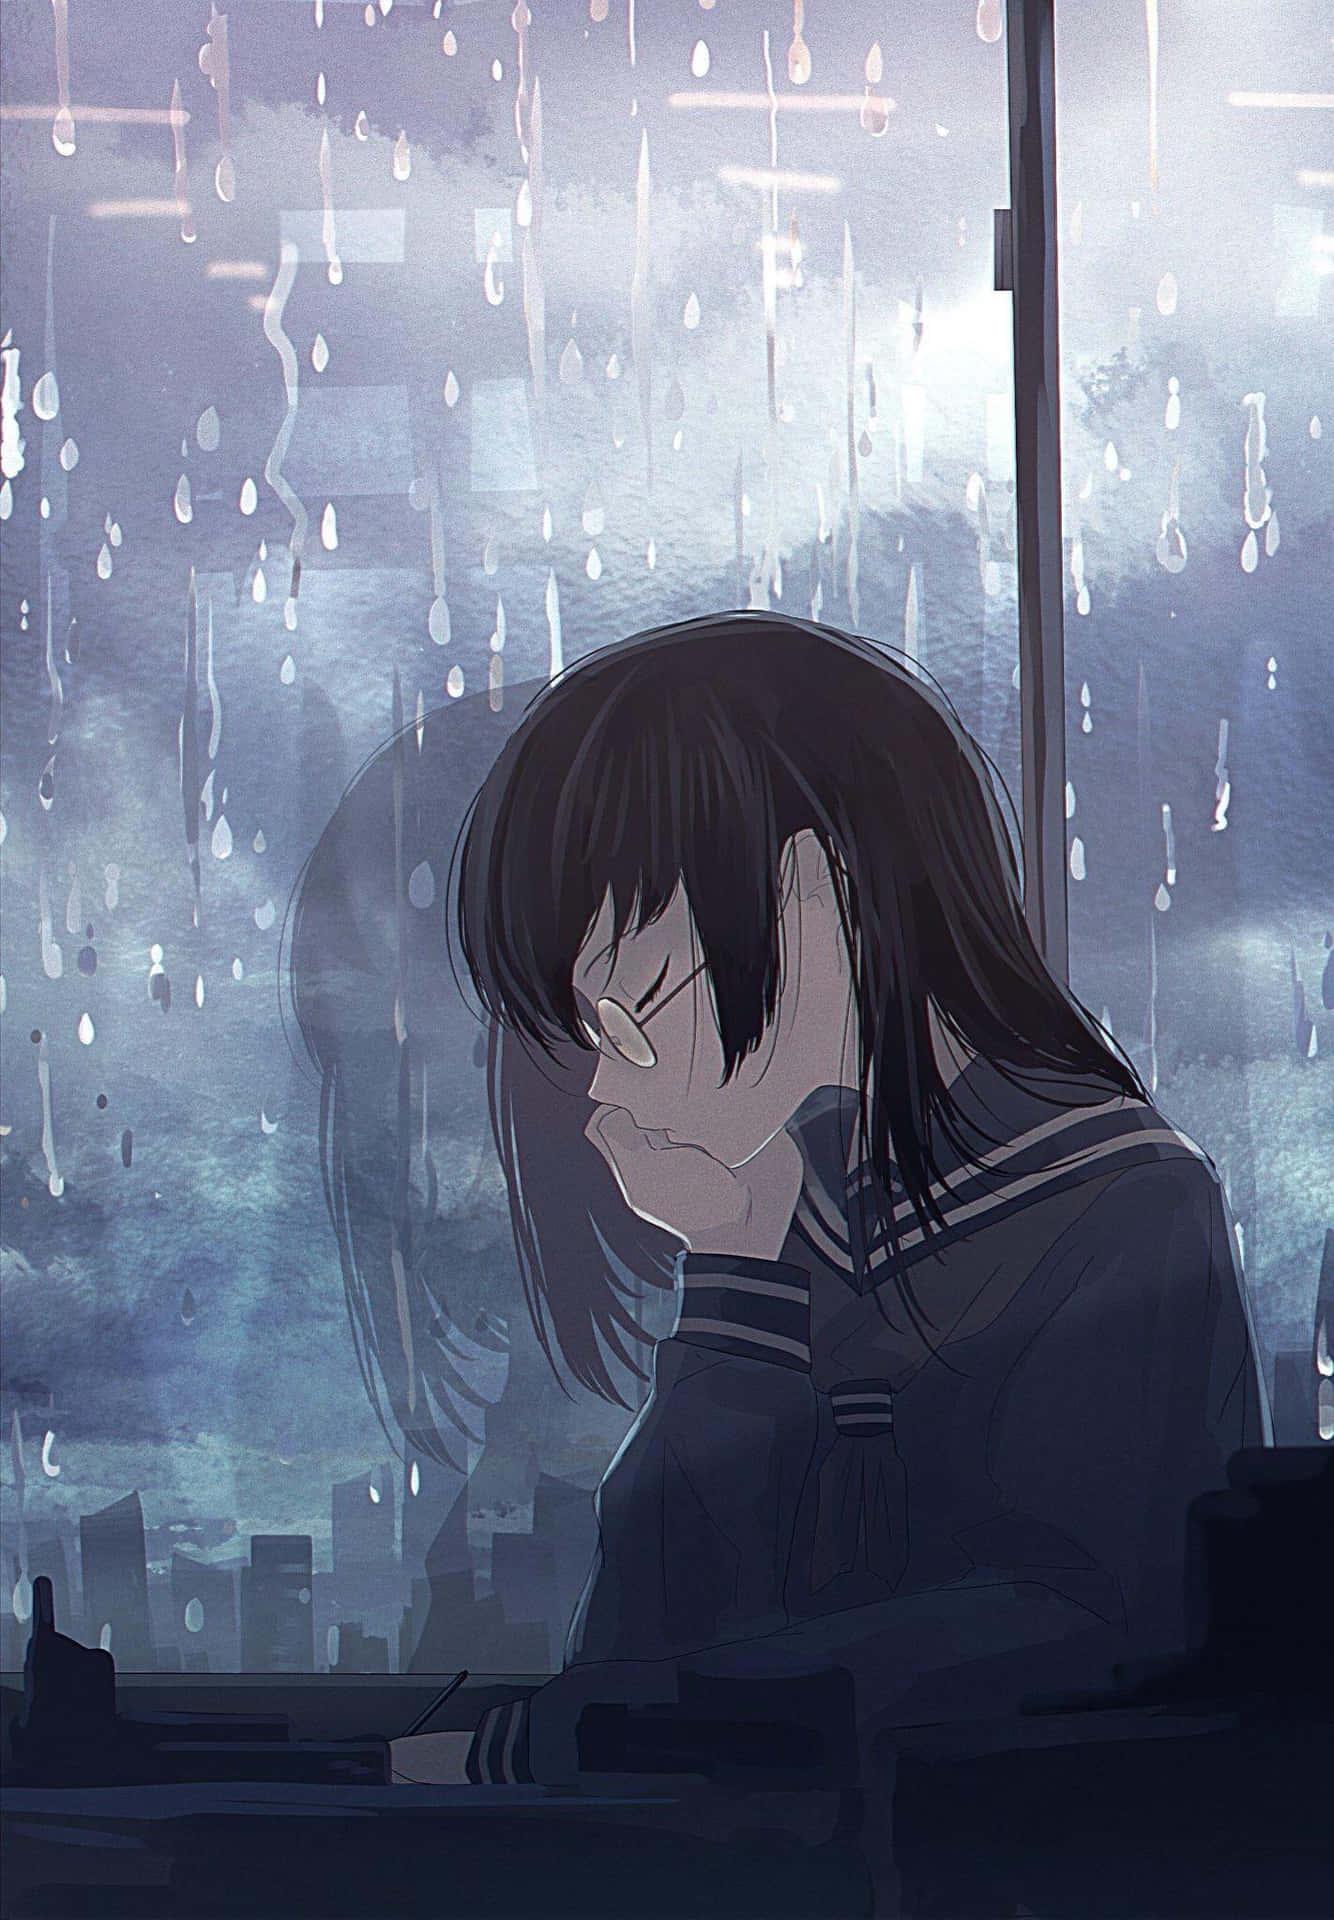 A somber anime character deep in thought Wallpaper